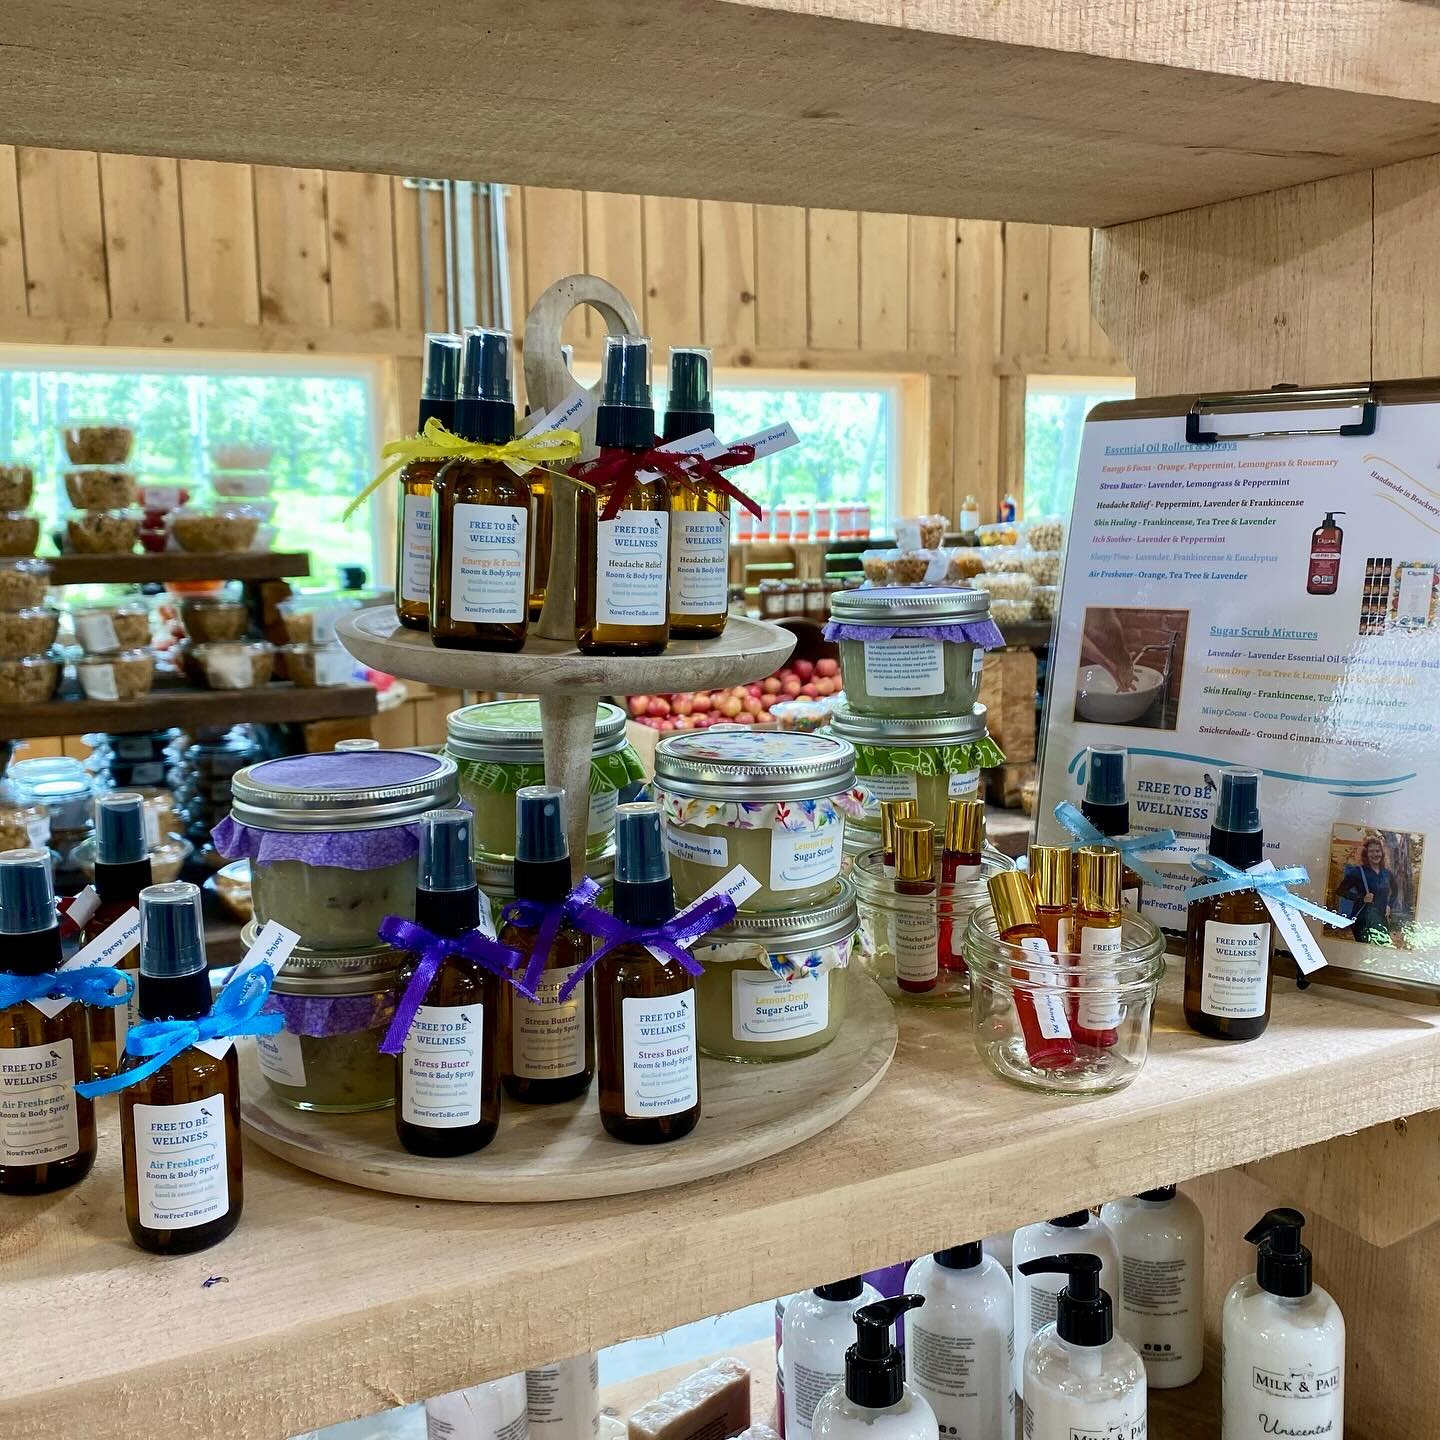 Free To Be Wellness natural body products are now on shelves at the Russel Farms store in Brackney, PA. 🎉🥳🎊 This is a big day for me as a small business owner. I&rsquo;m so grateful for the opportunity to share these clean, simple and powerful bod